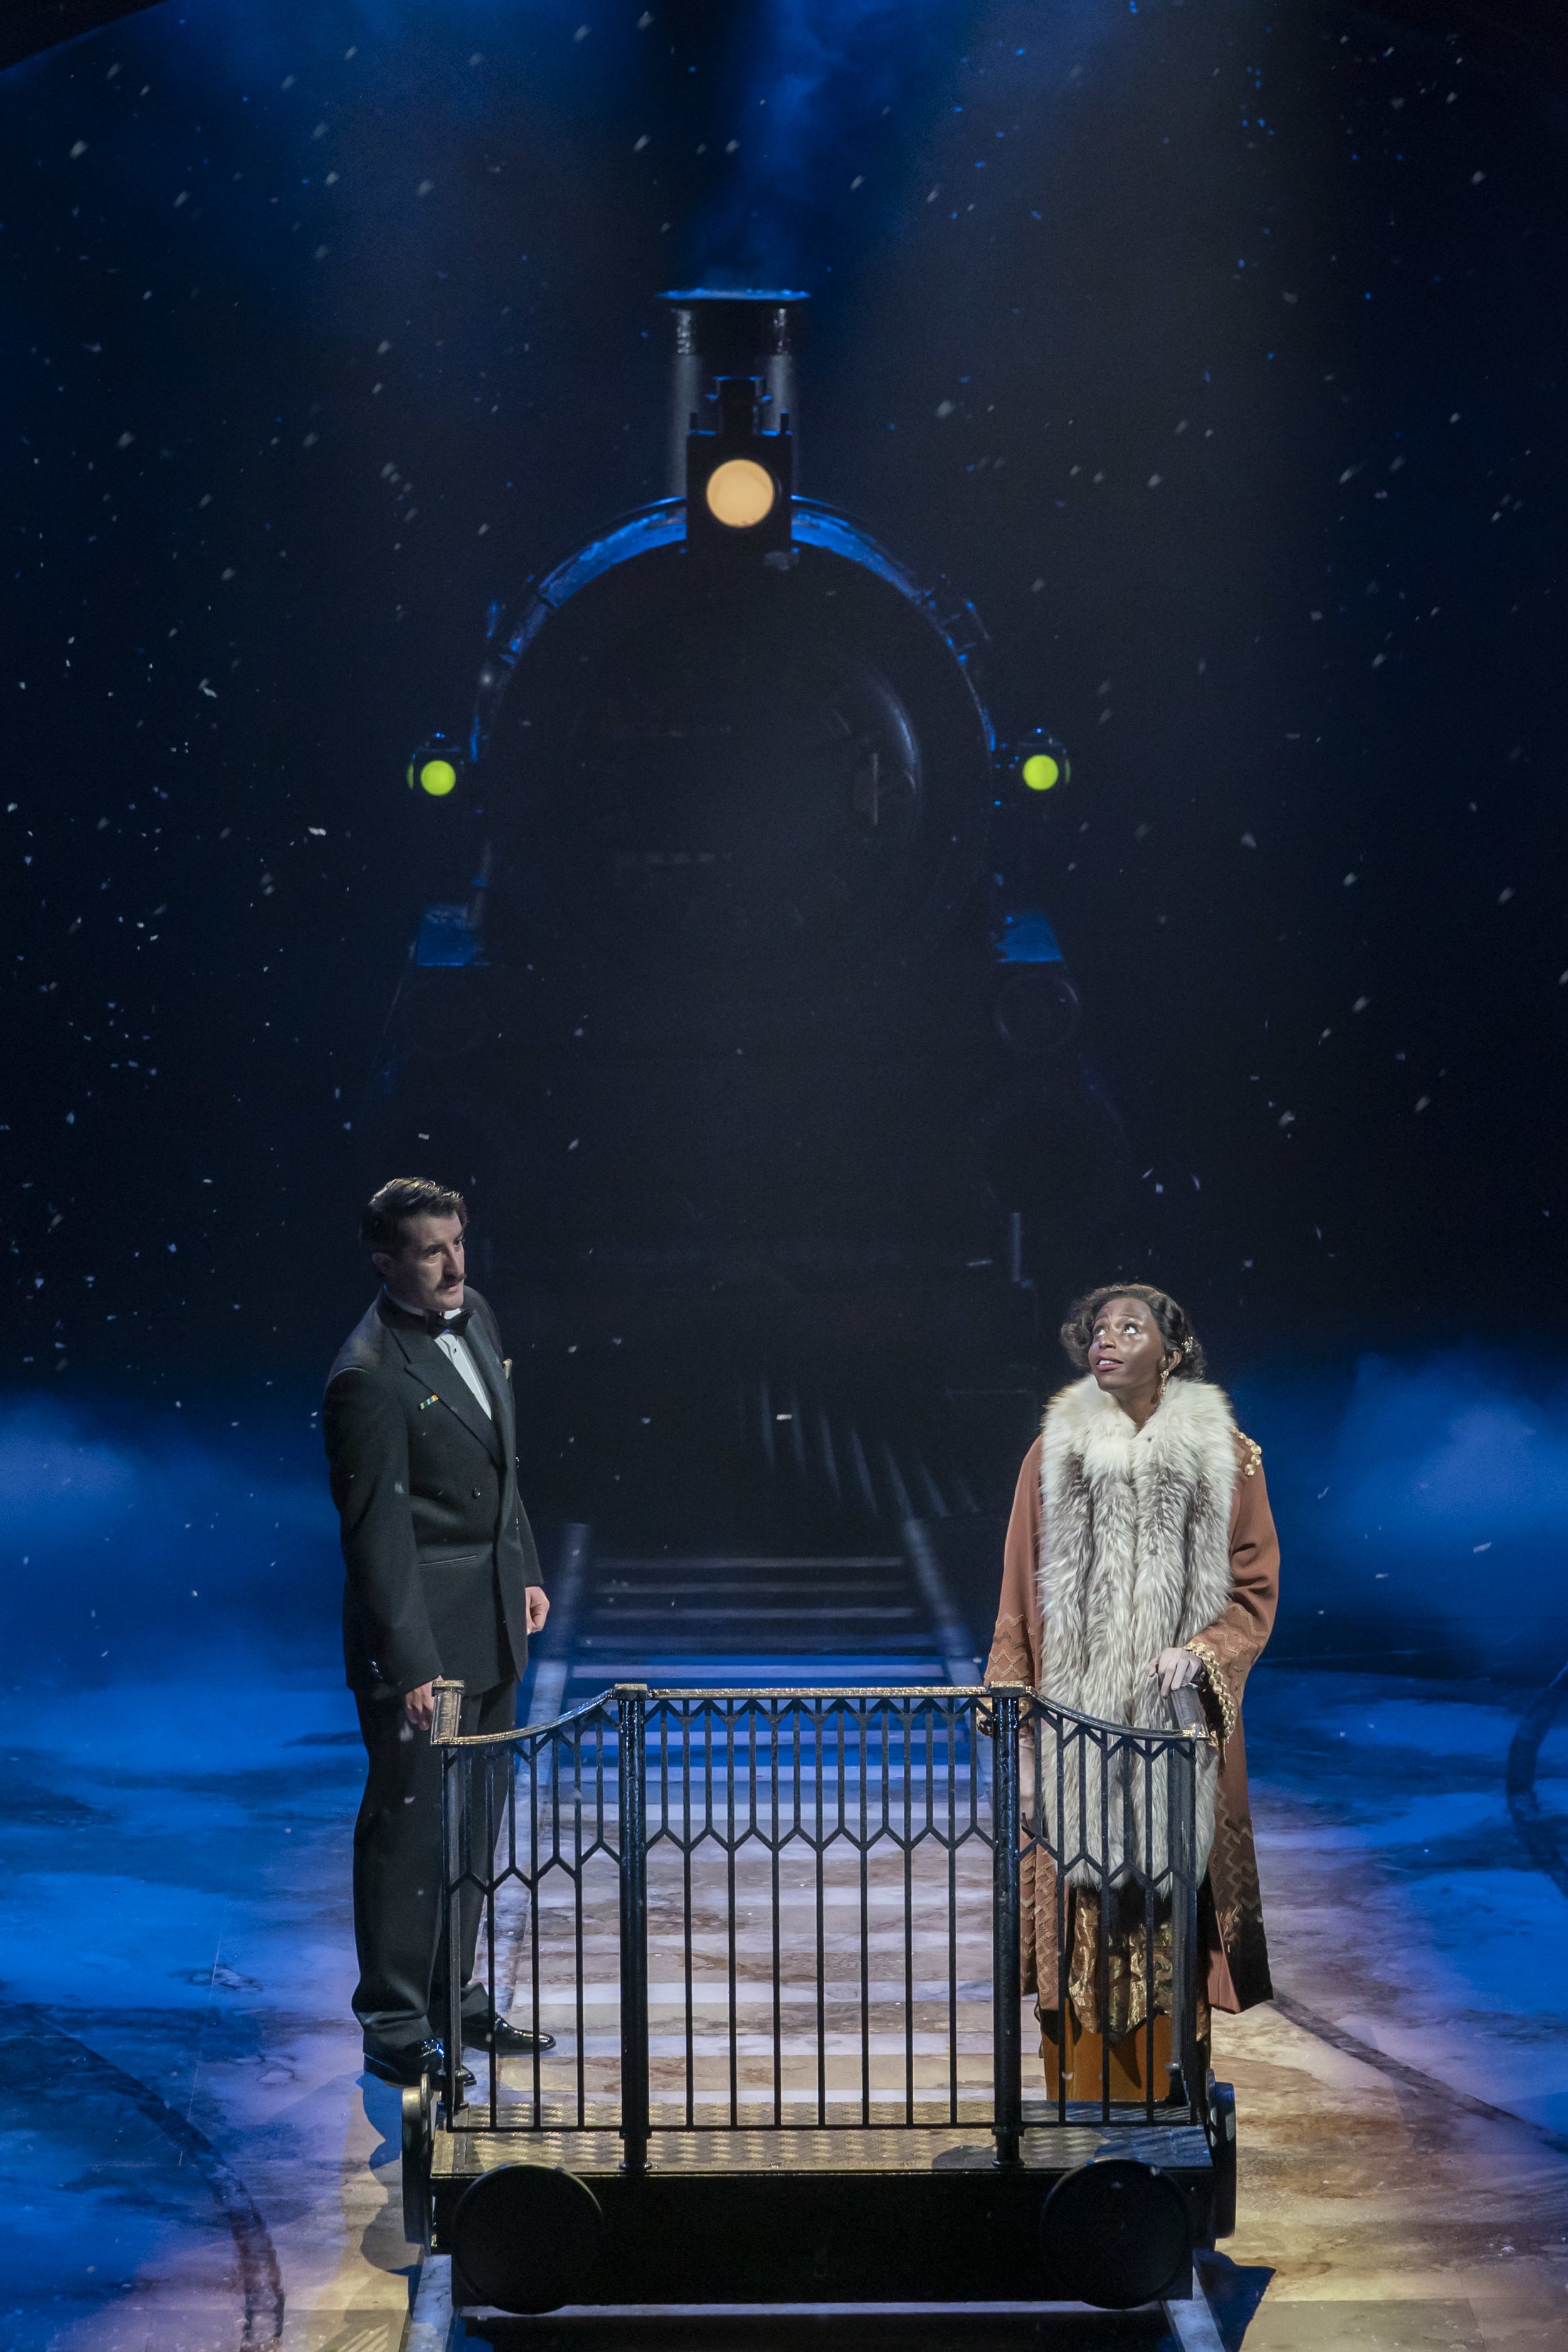 Murder on the Orient Express at Chichester Festival Theatre